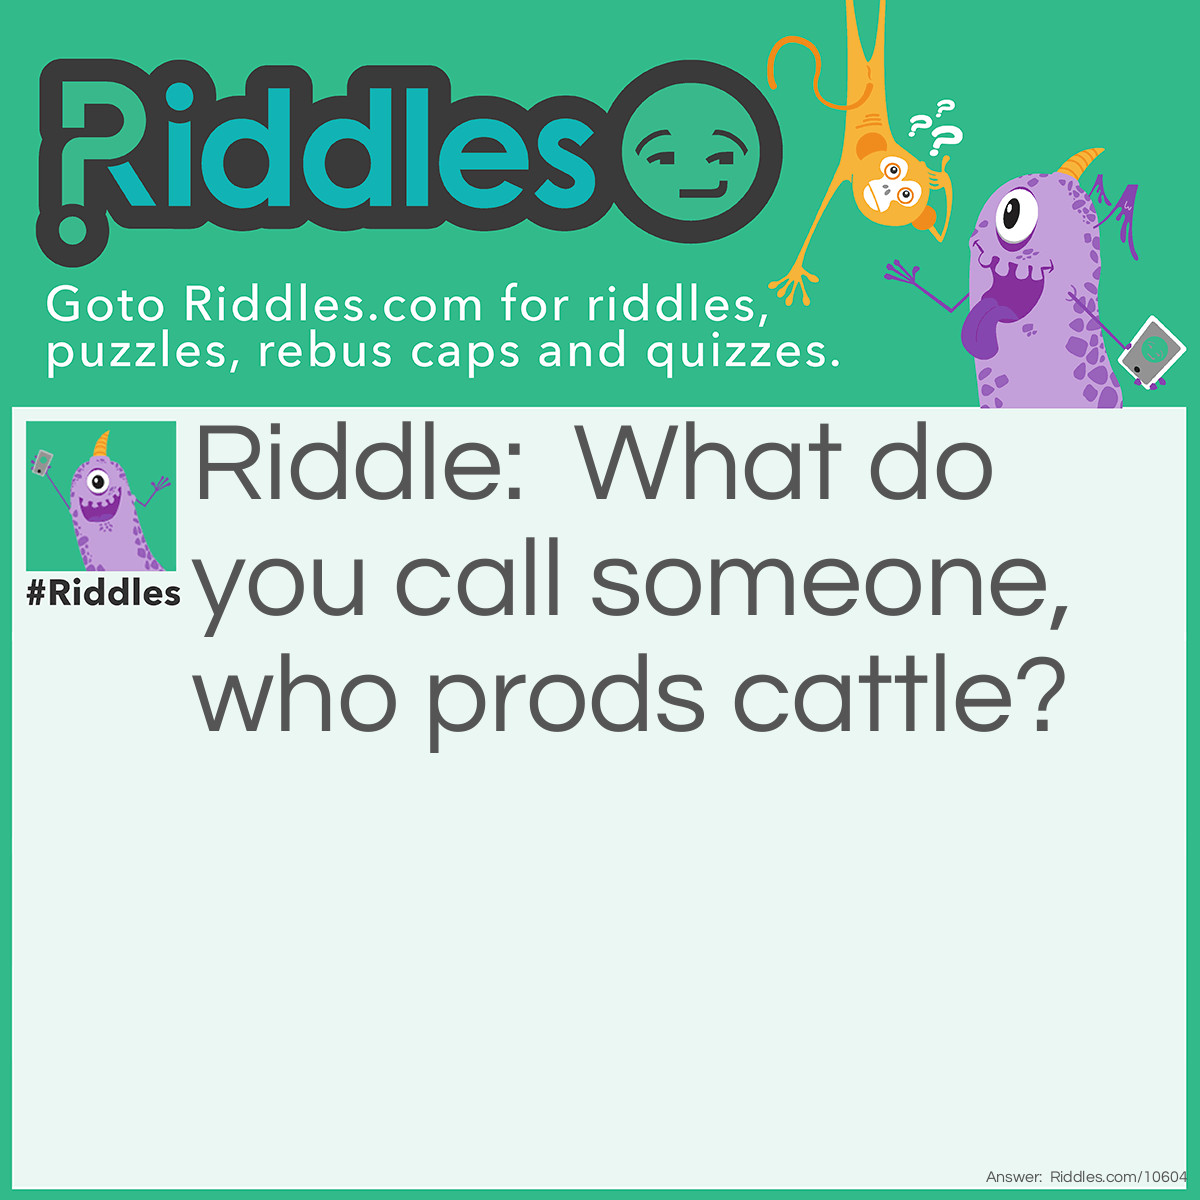 Riddle: What do you call someone, who prods cattle? Answer: A Cow-poke.